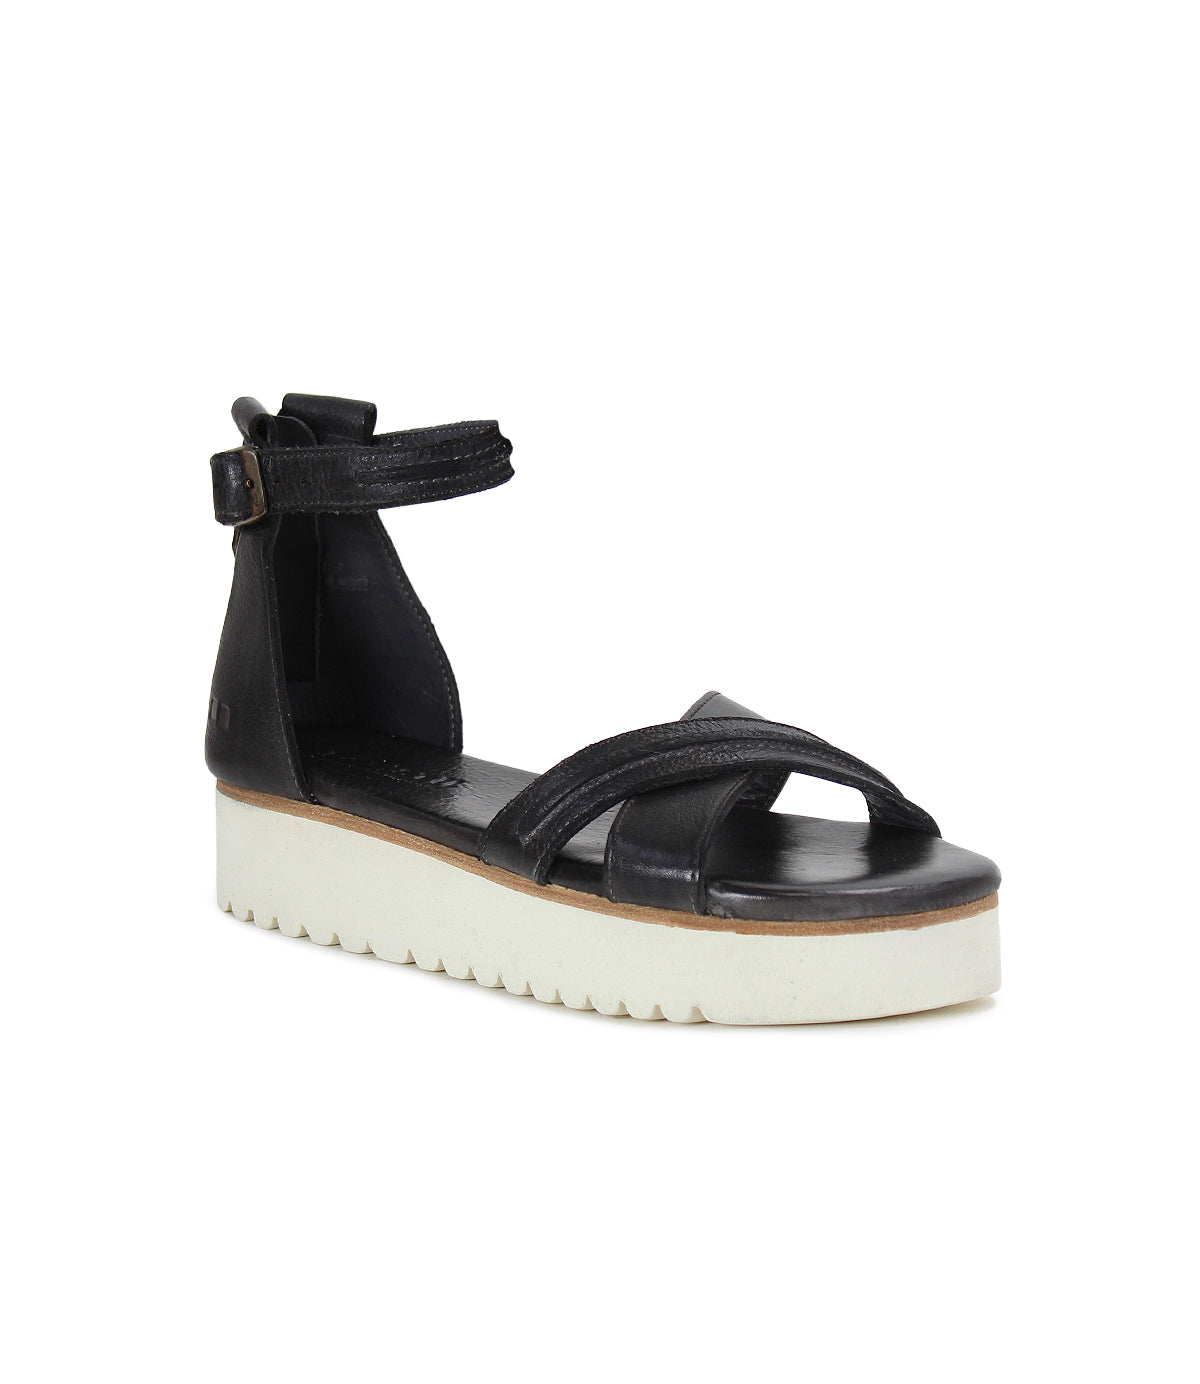 A women's Carroll platform sandal by Bed Stu with a white sole.